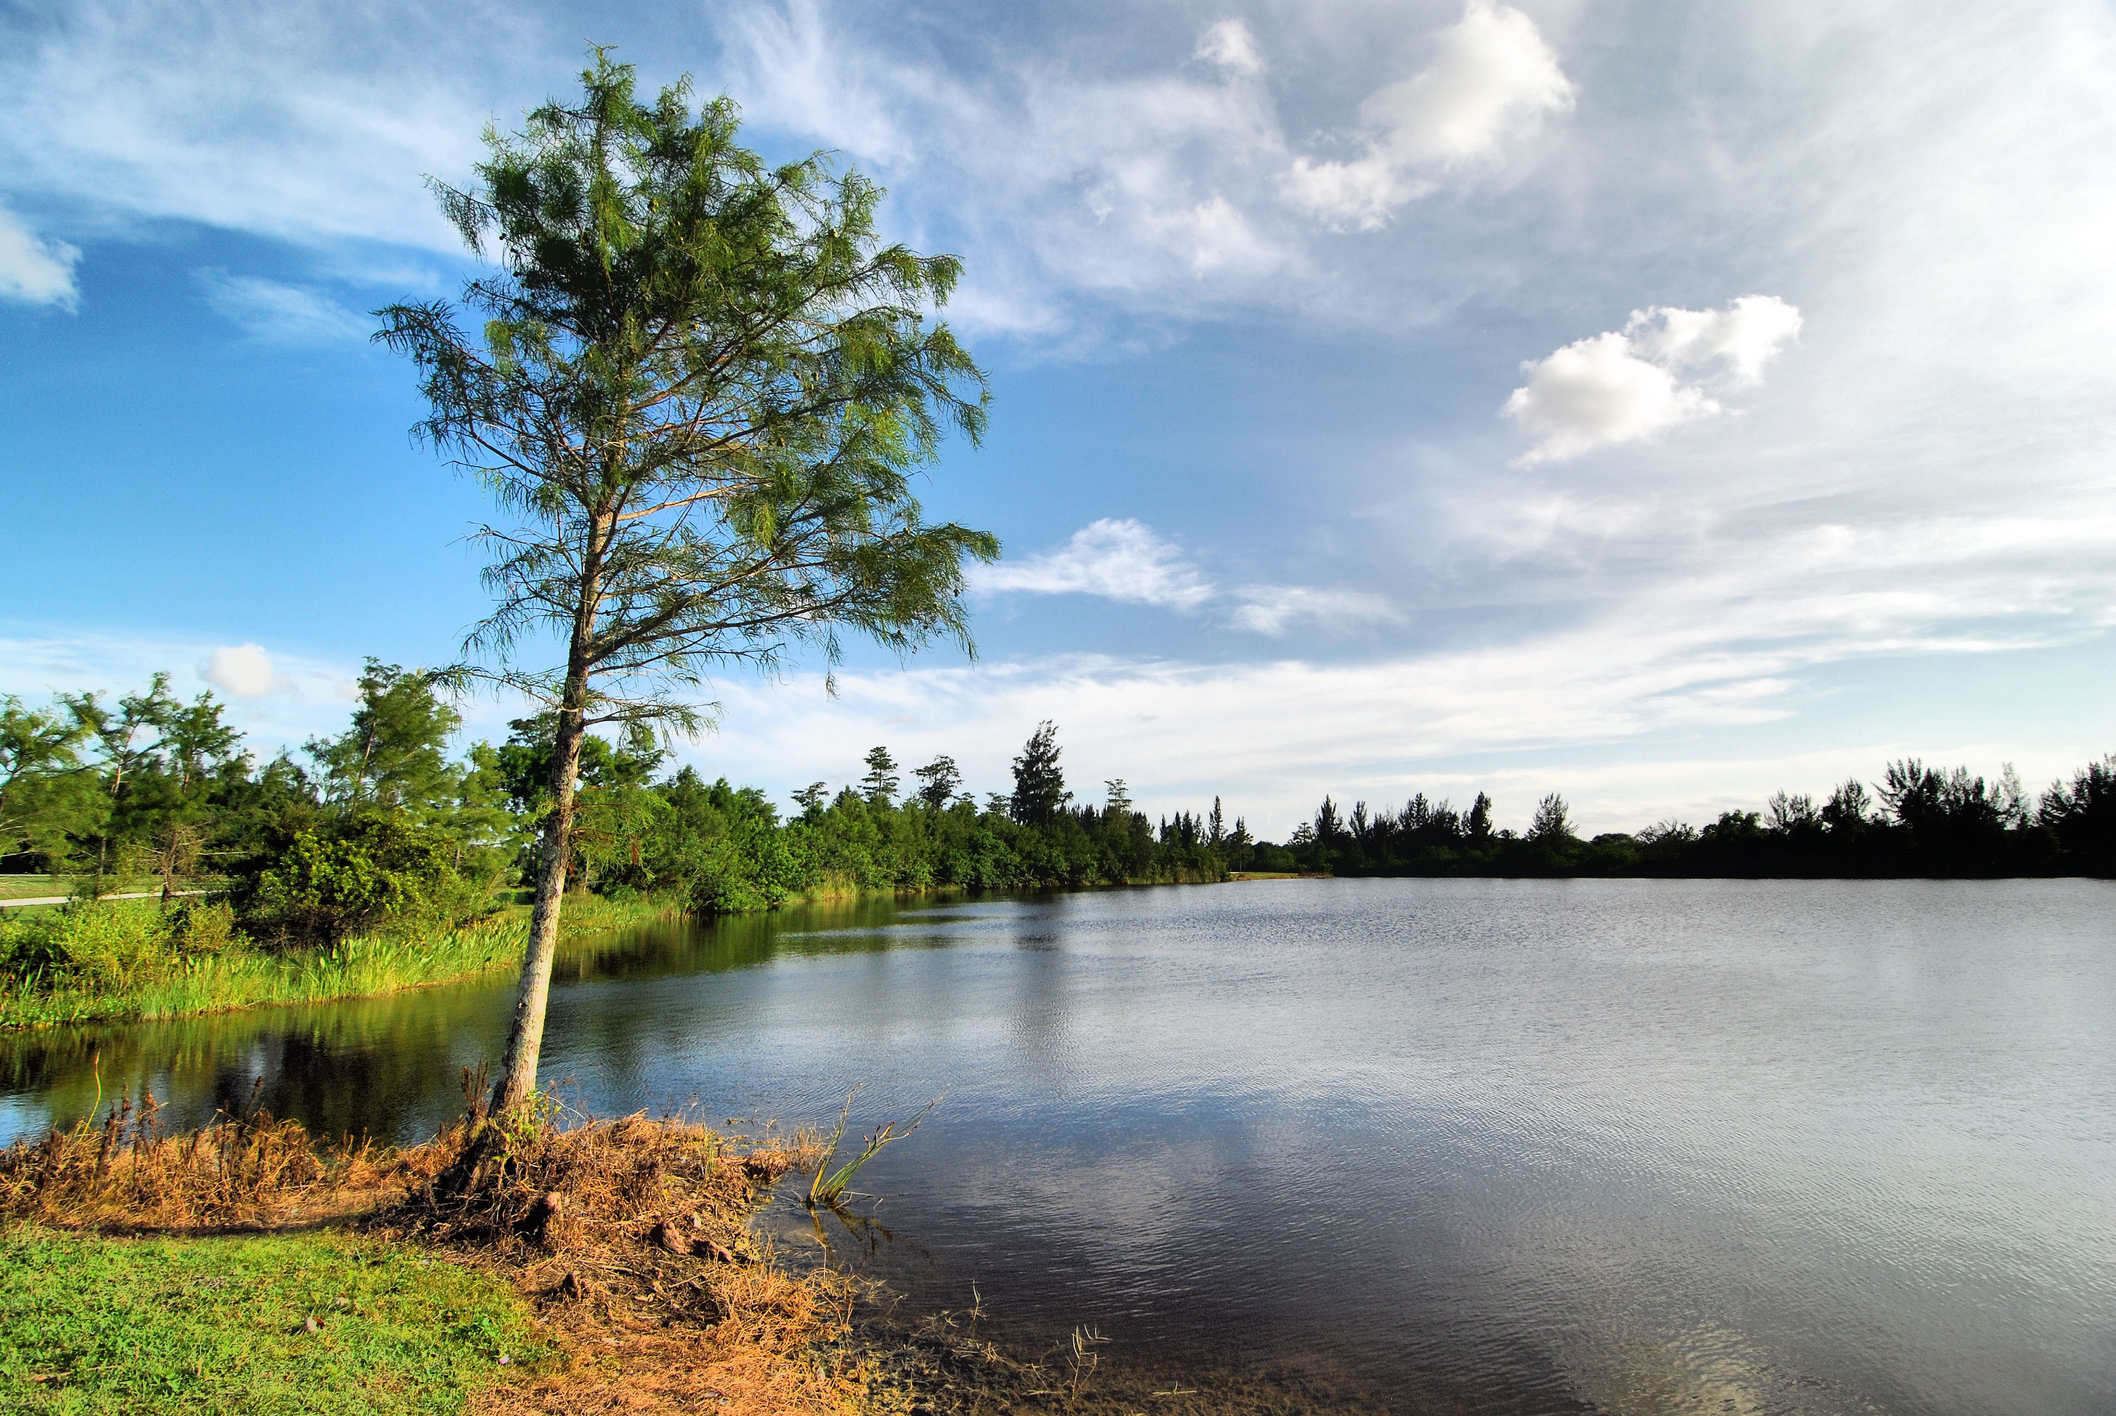 A lone pine tree casts shade over a small lake.